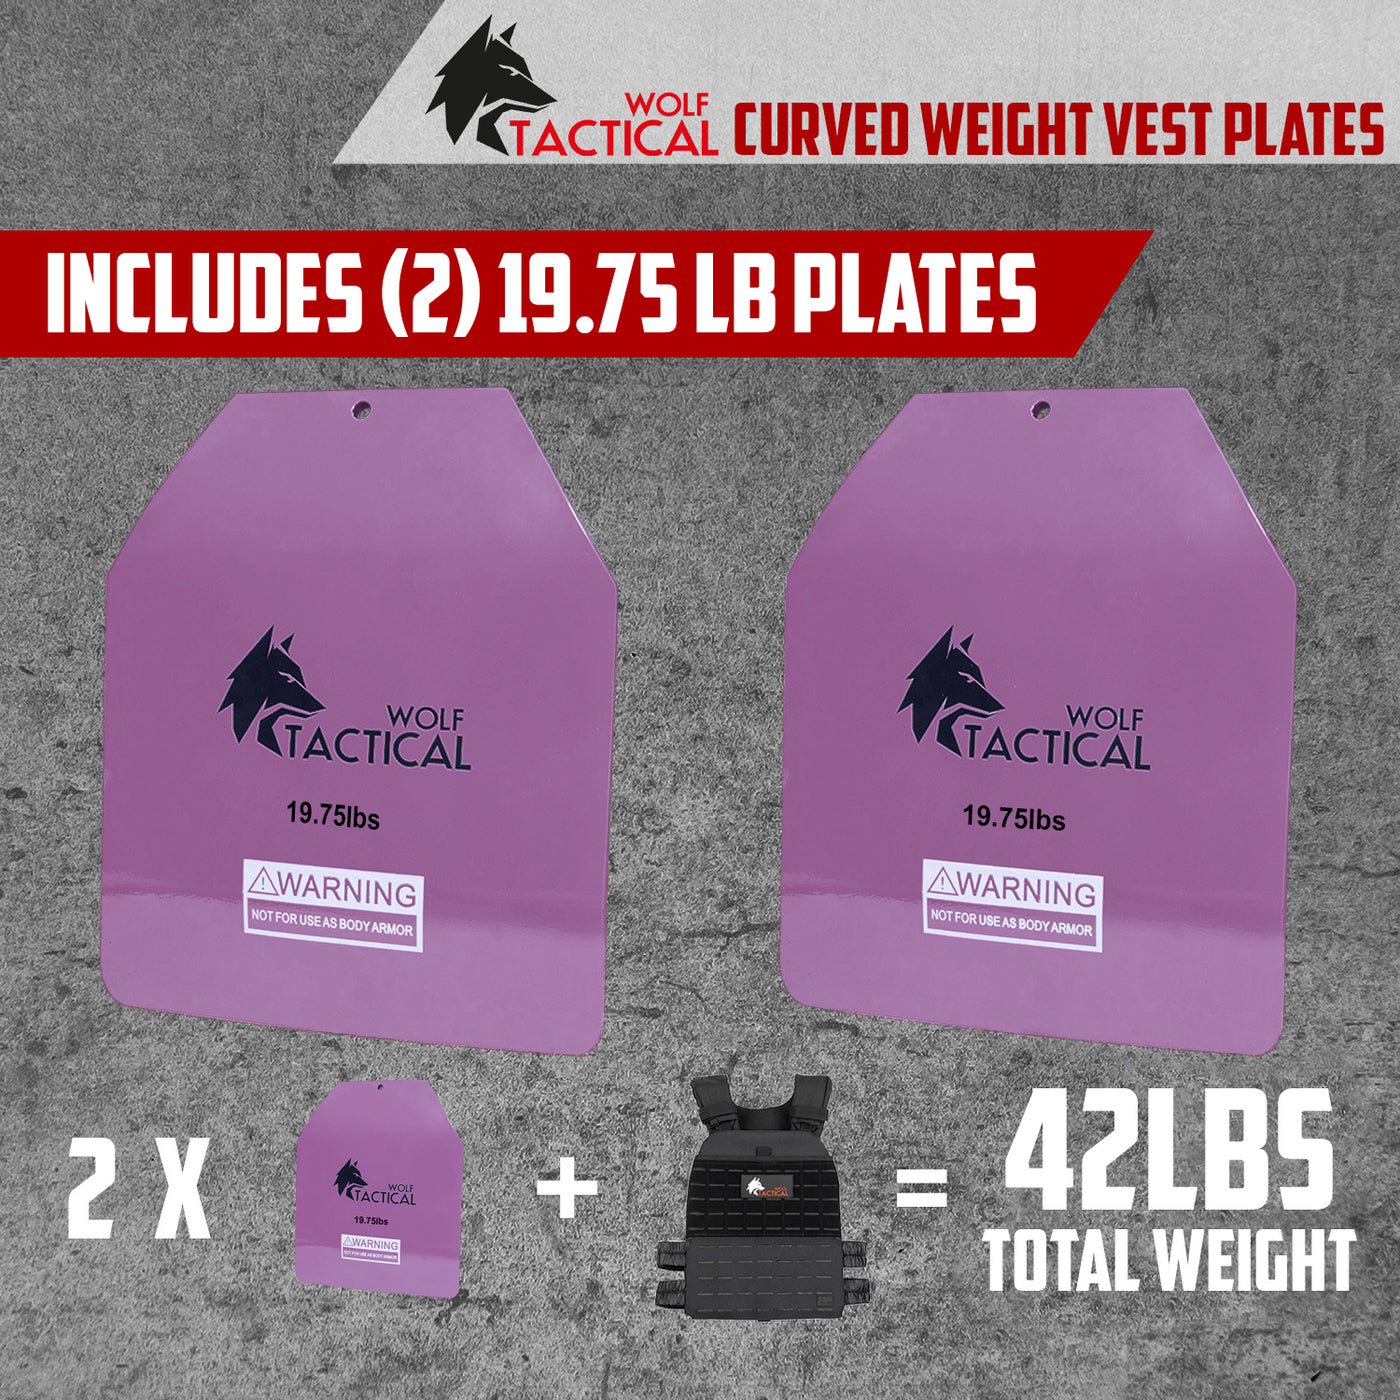 Curved Weight Vest Plates